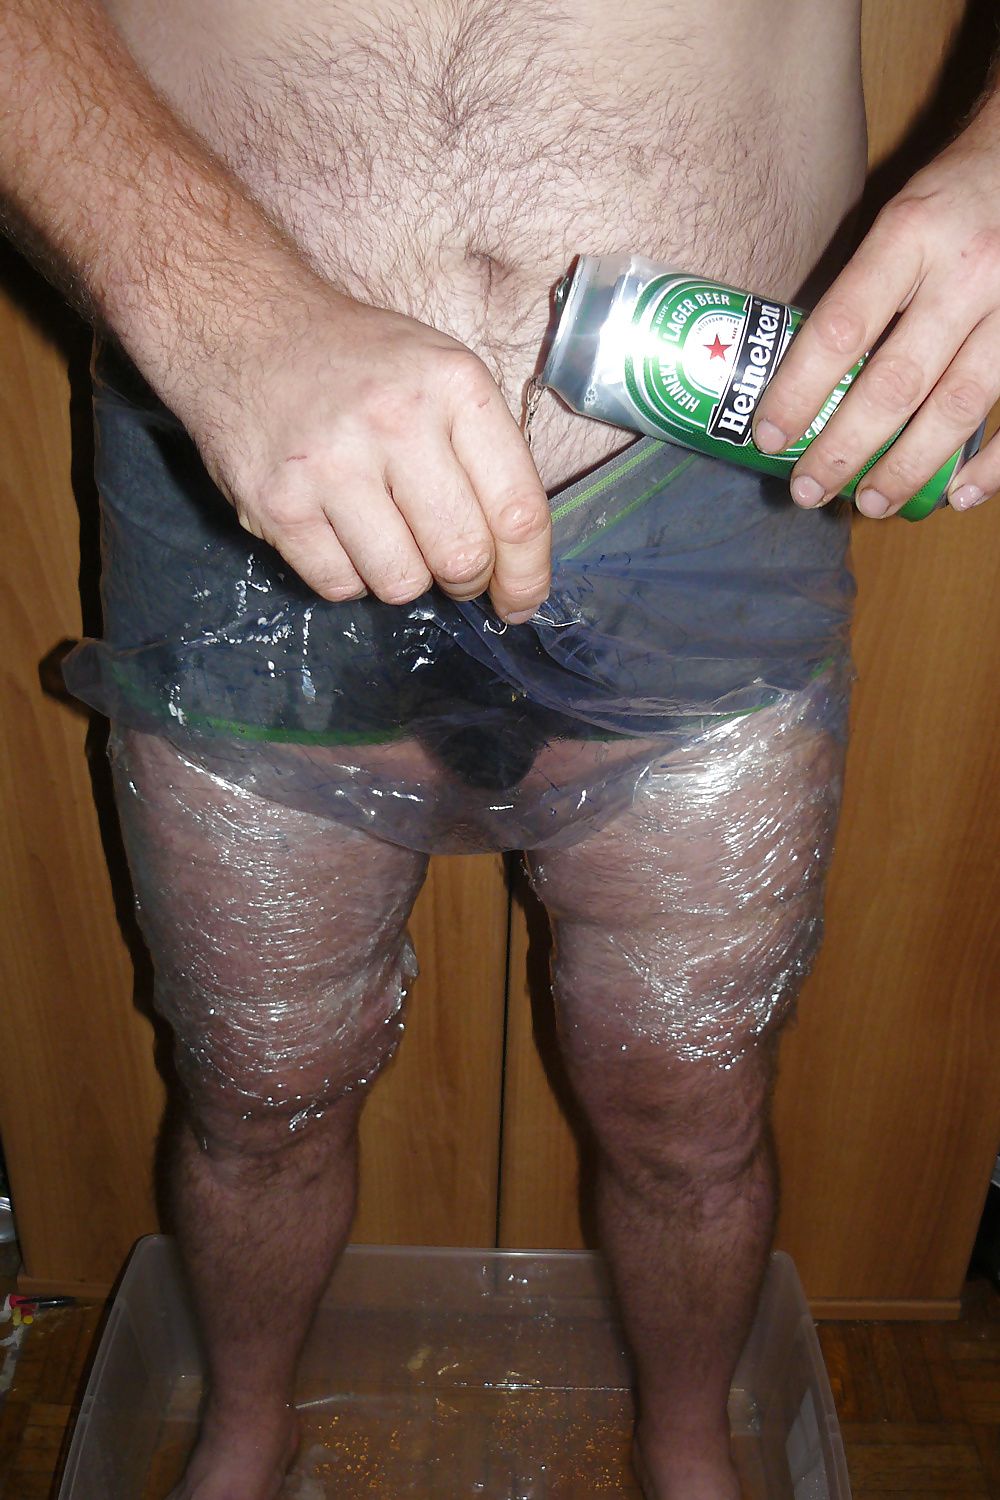 Humiliation with beer #12